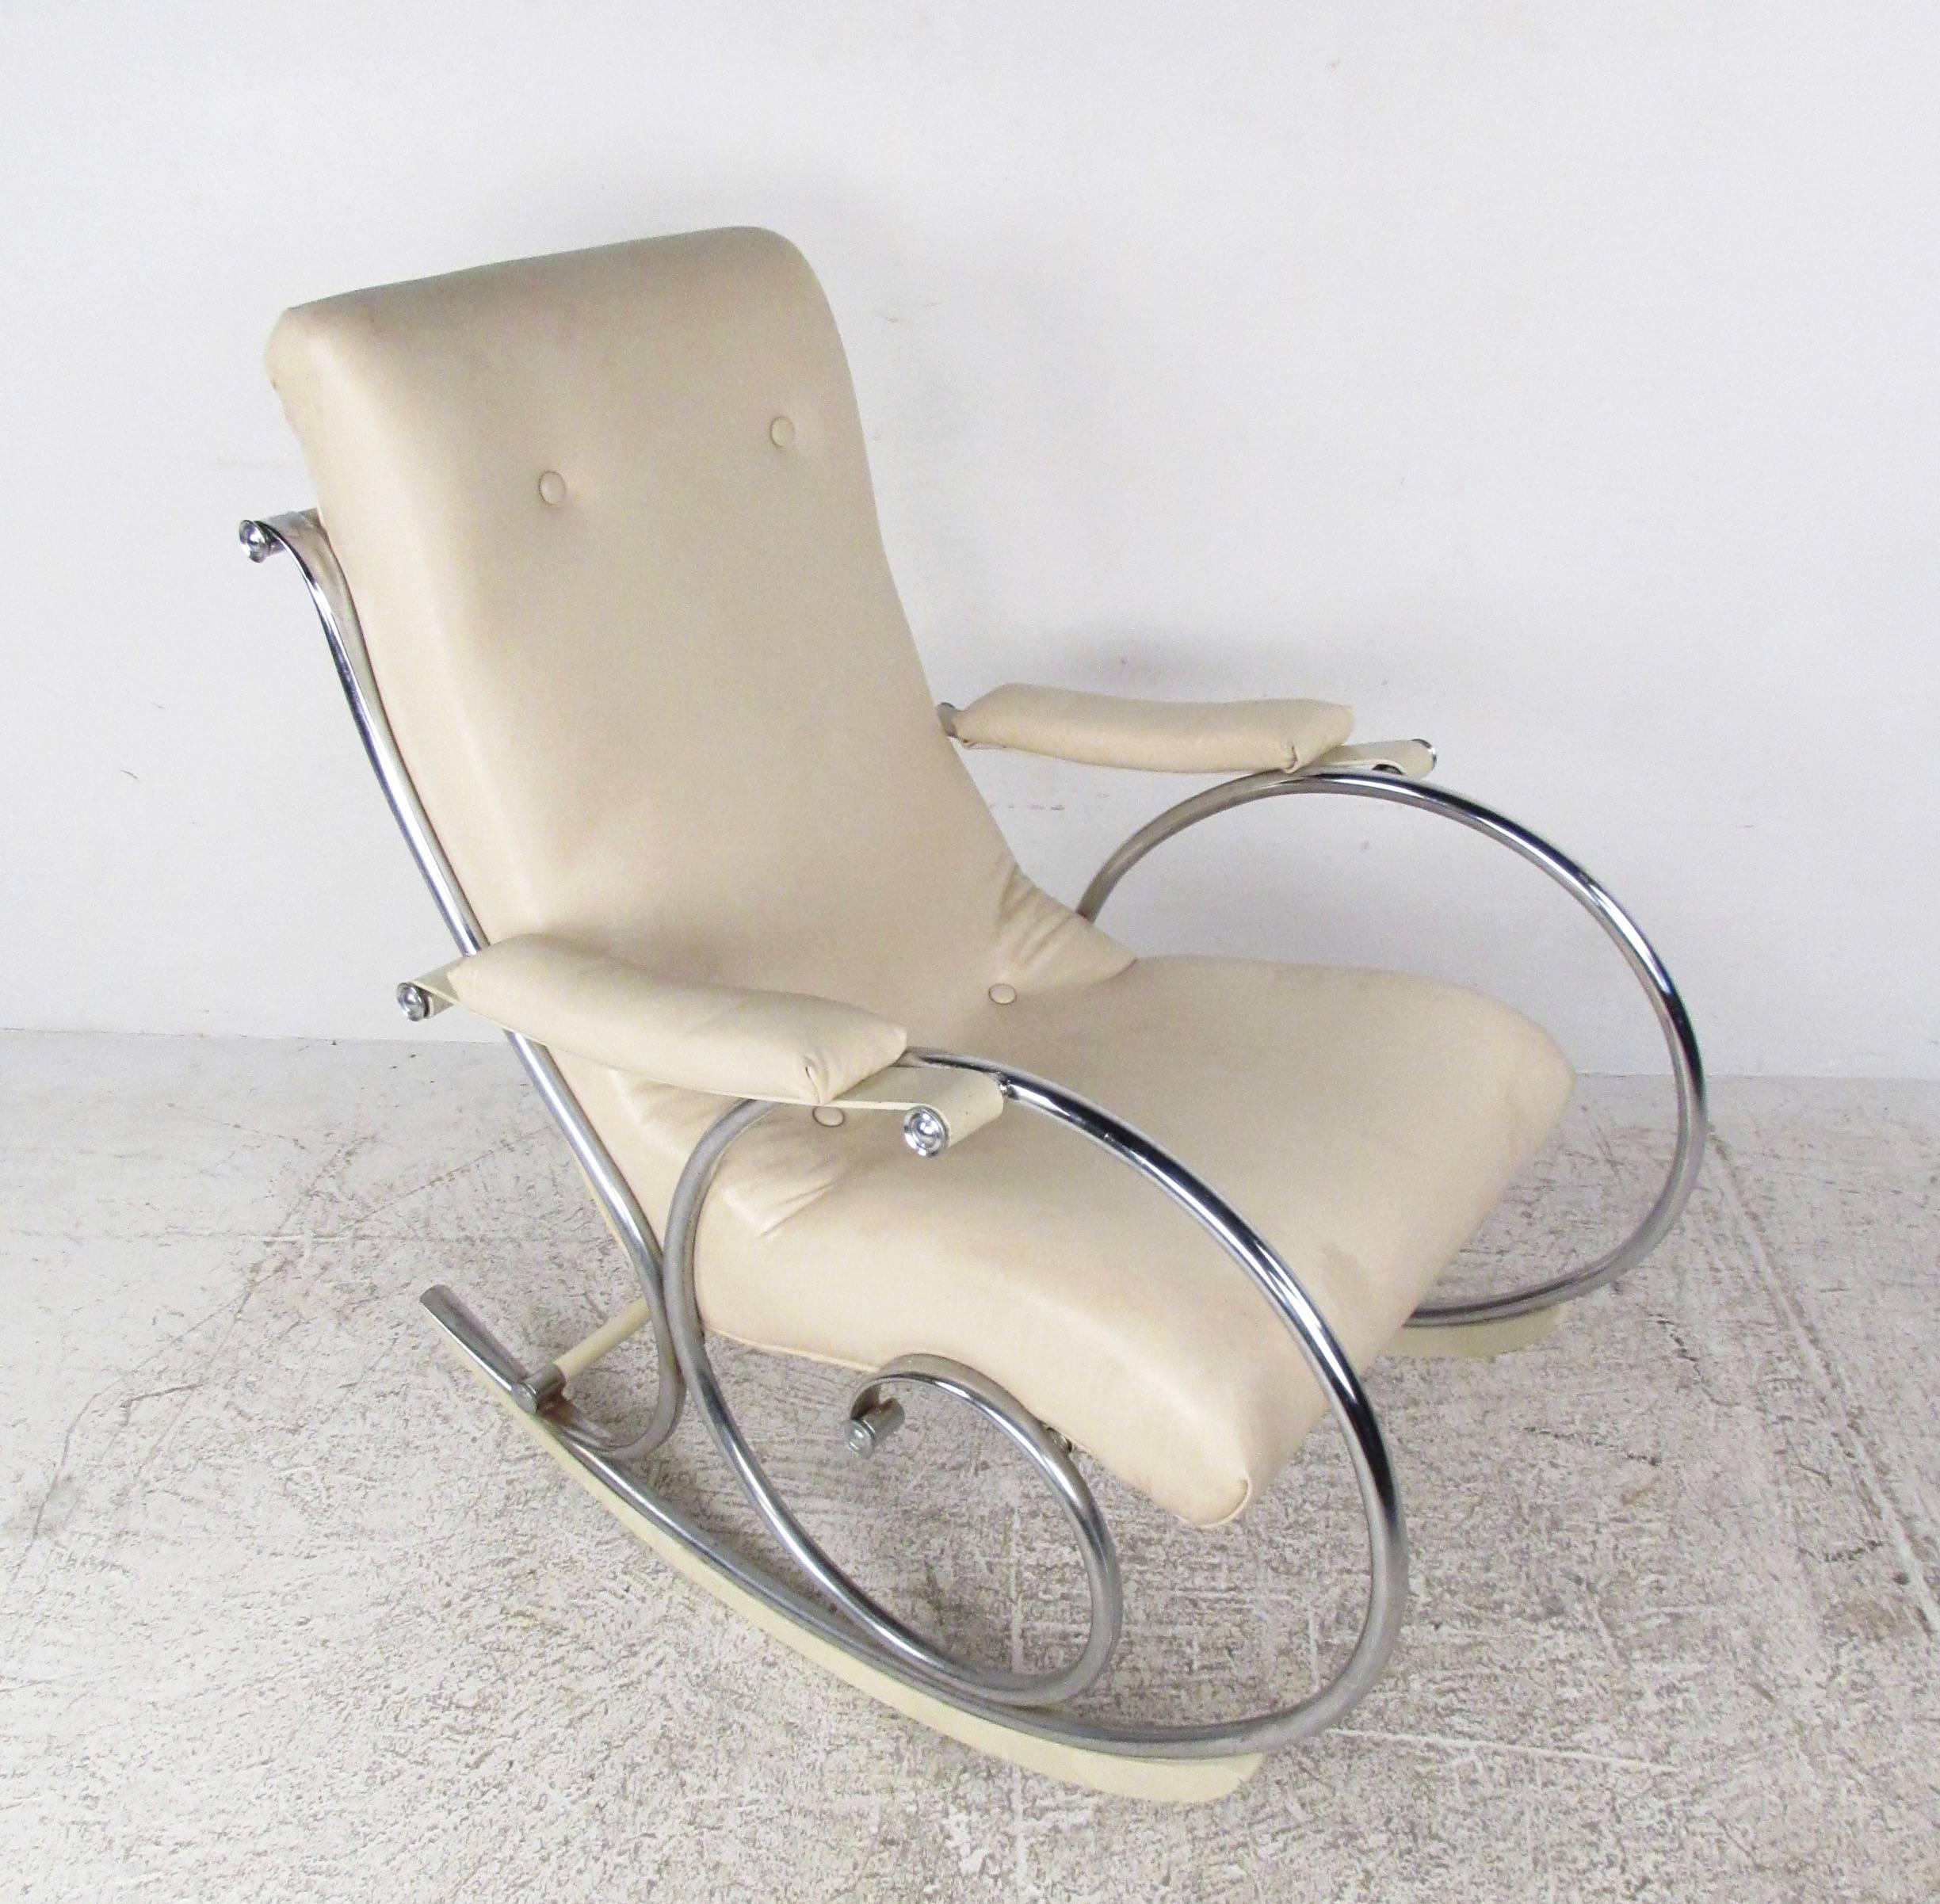 This sleek modern rocking chair features a tufted vinyl seat with stylish chrome frame. Mounted wooden rockers ensure a fluid rocking motion, while padded armrests and high back seat ensure optimal comfort. This beautiful Mid-Century Modern rocking